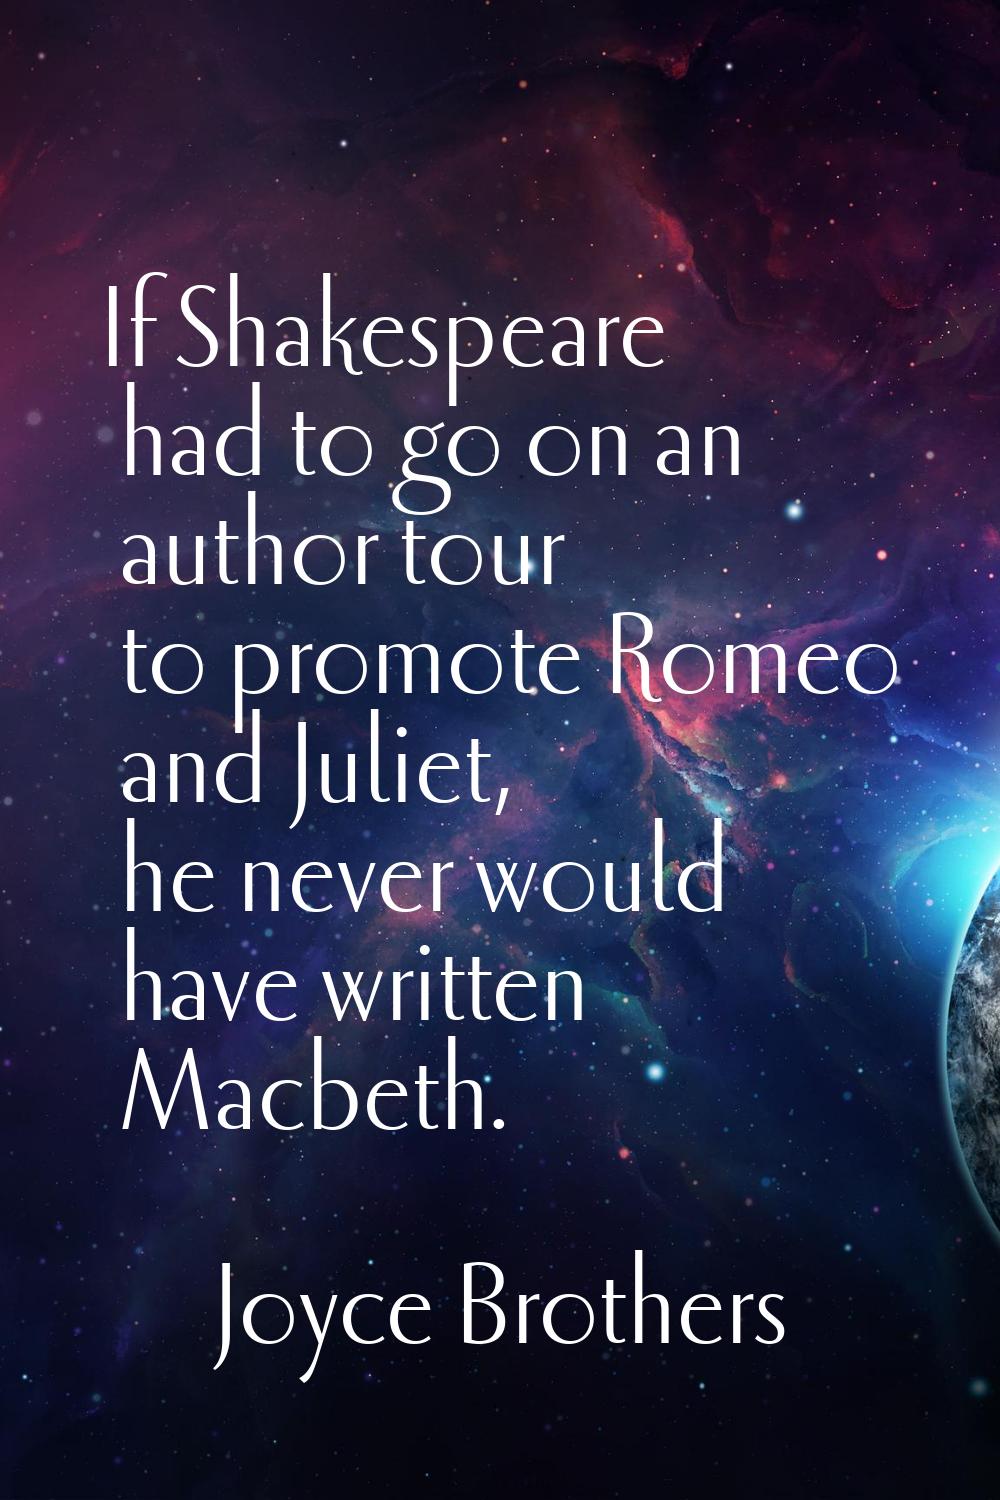 If Shakespeare had to go on an author tour to promote Romeo and Juliet, he never would have written